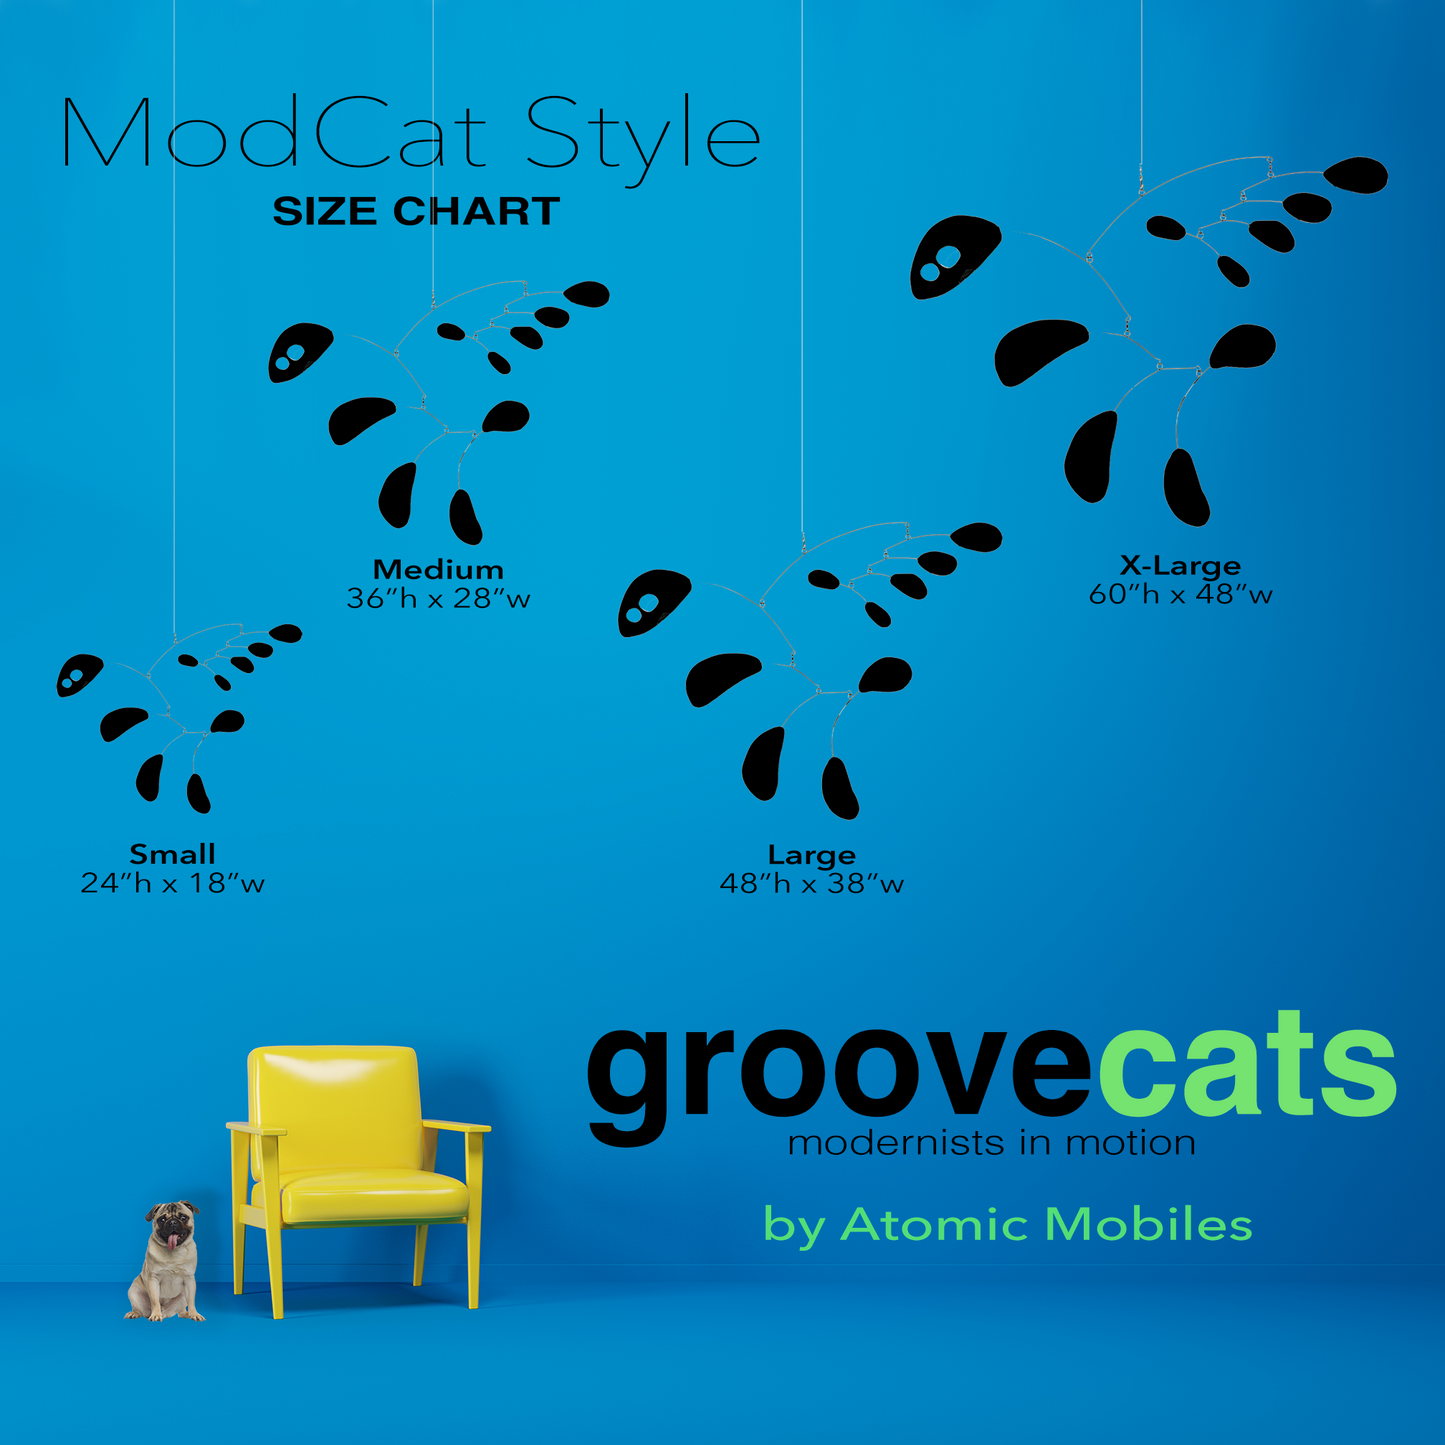 Size Chart for GrooveCats hanging art mobile in MODCat Style with yellow chair and cute pug dog- handmade mid century modern kinetic art by AtomicMobiles.com